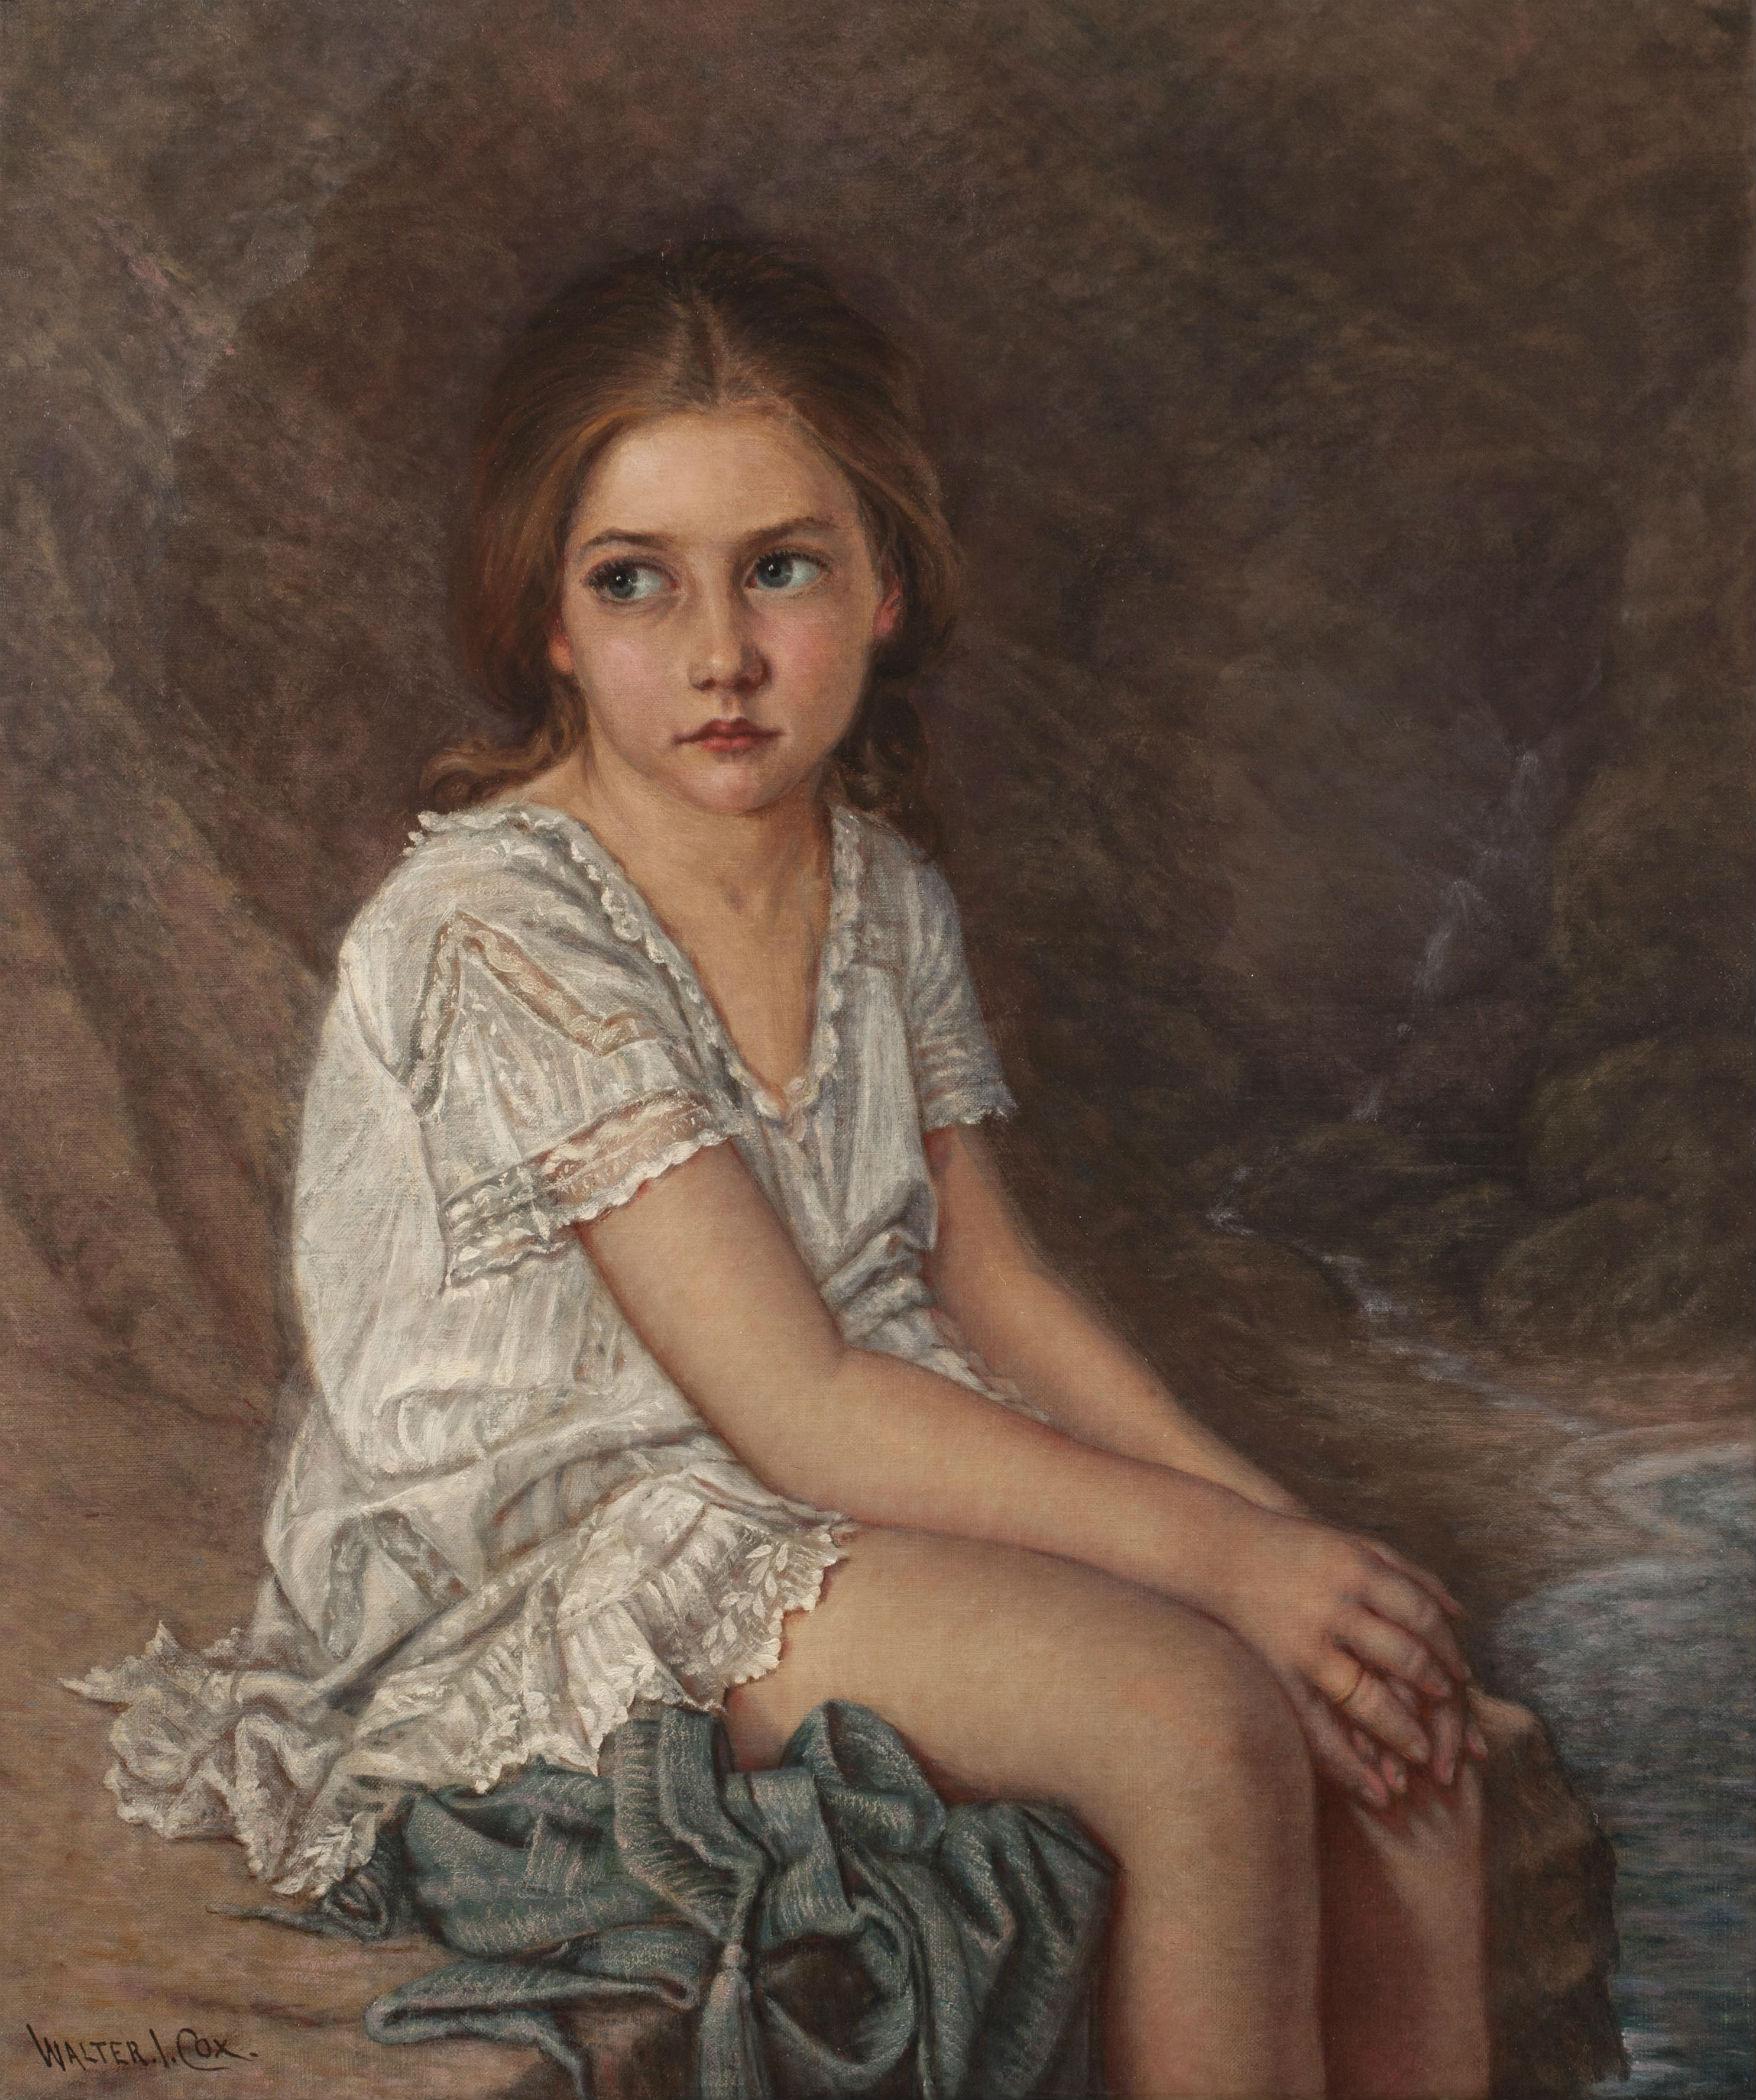 Portrait of a Girl - Painting by Walter Cox